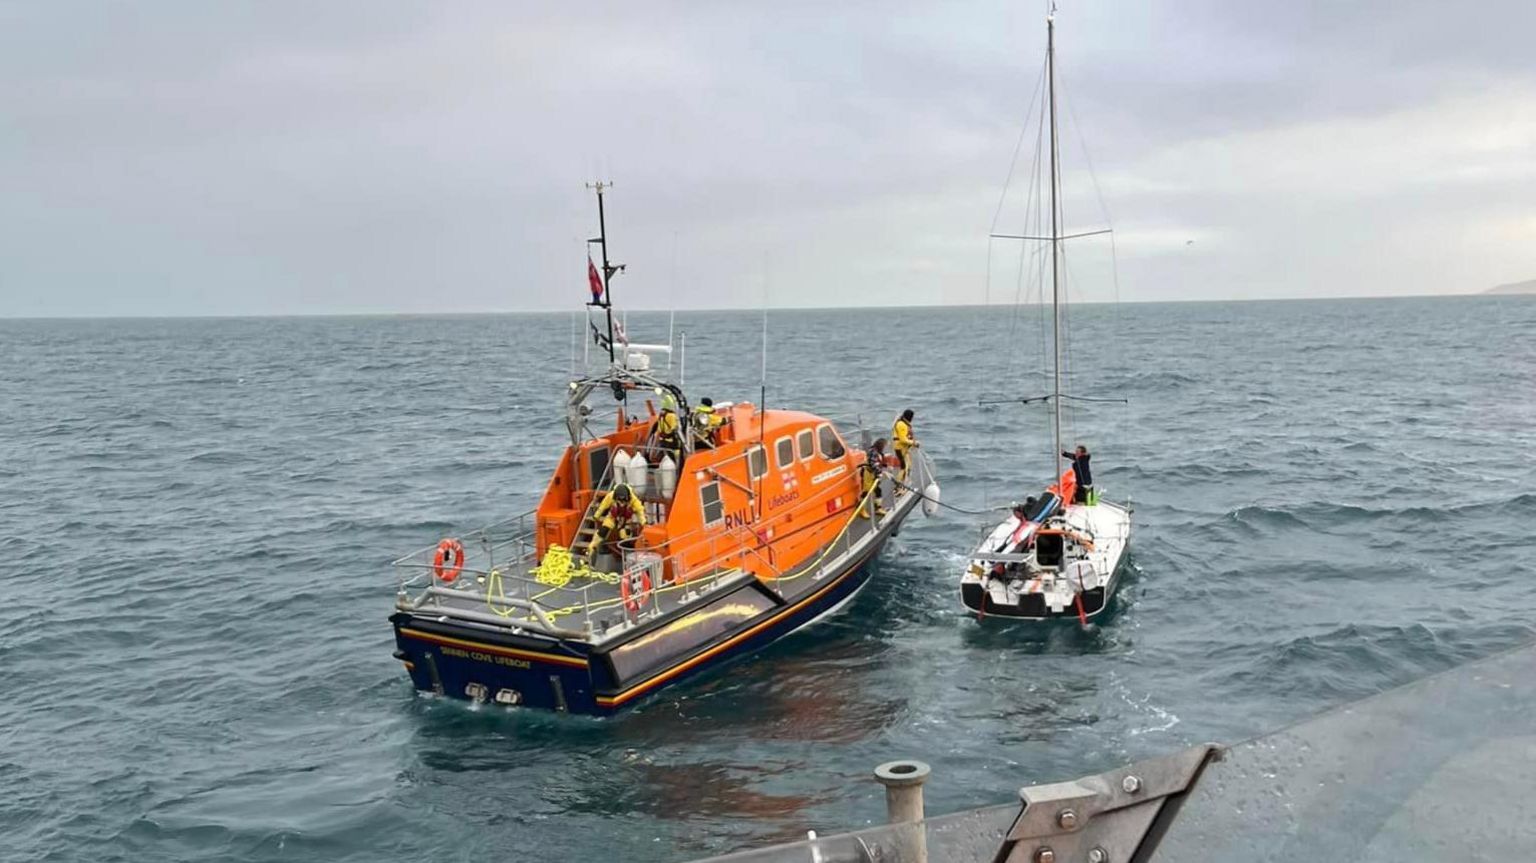 The Sennen Cove lifeboat at sea with the yacht